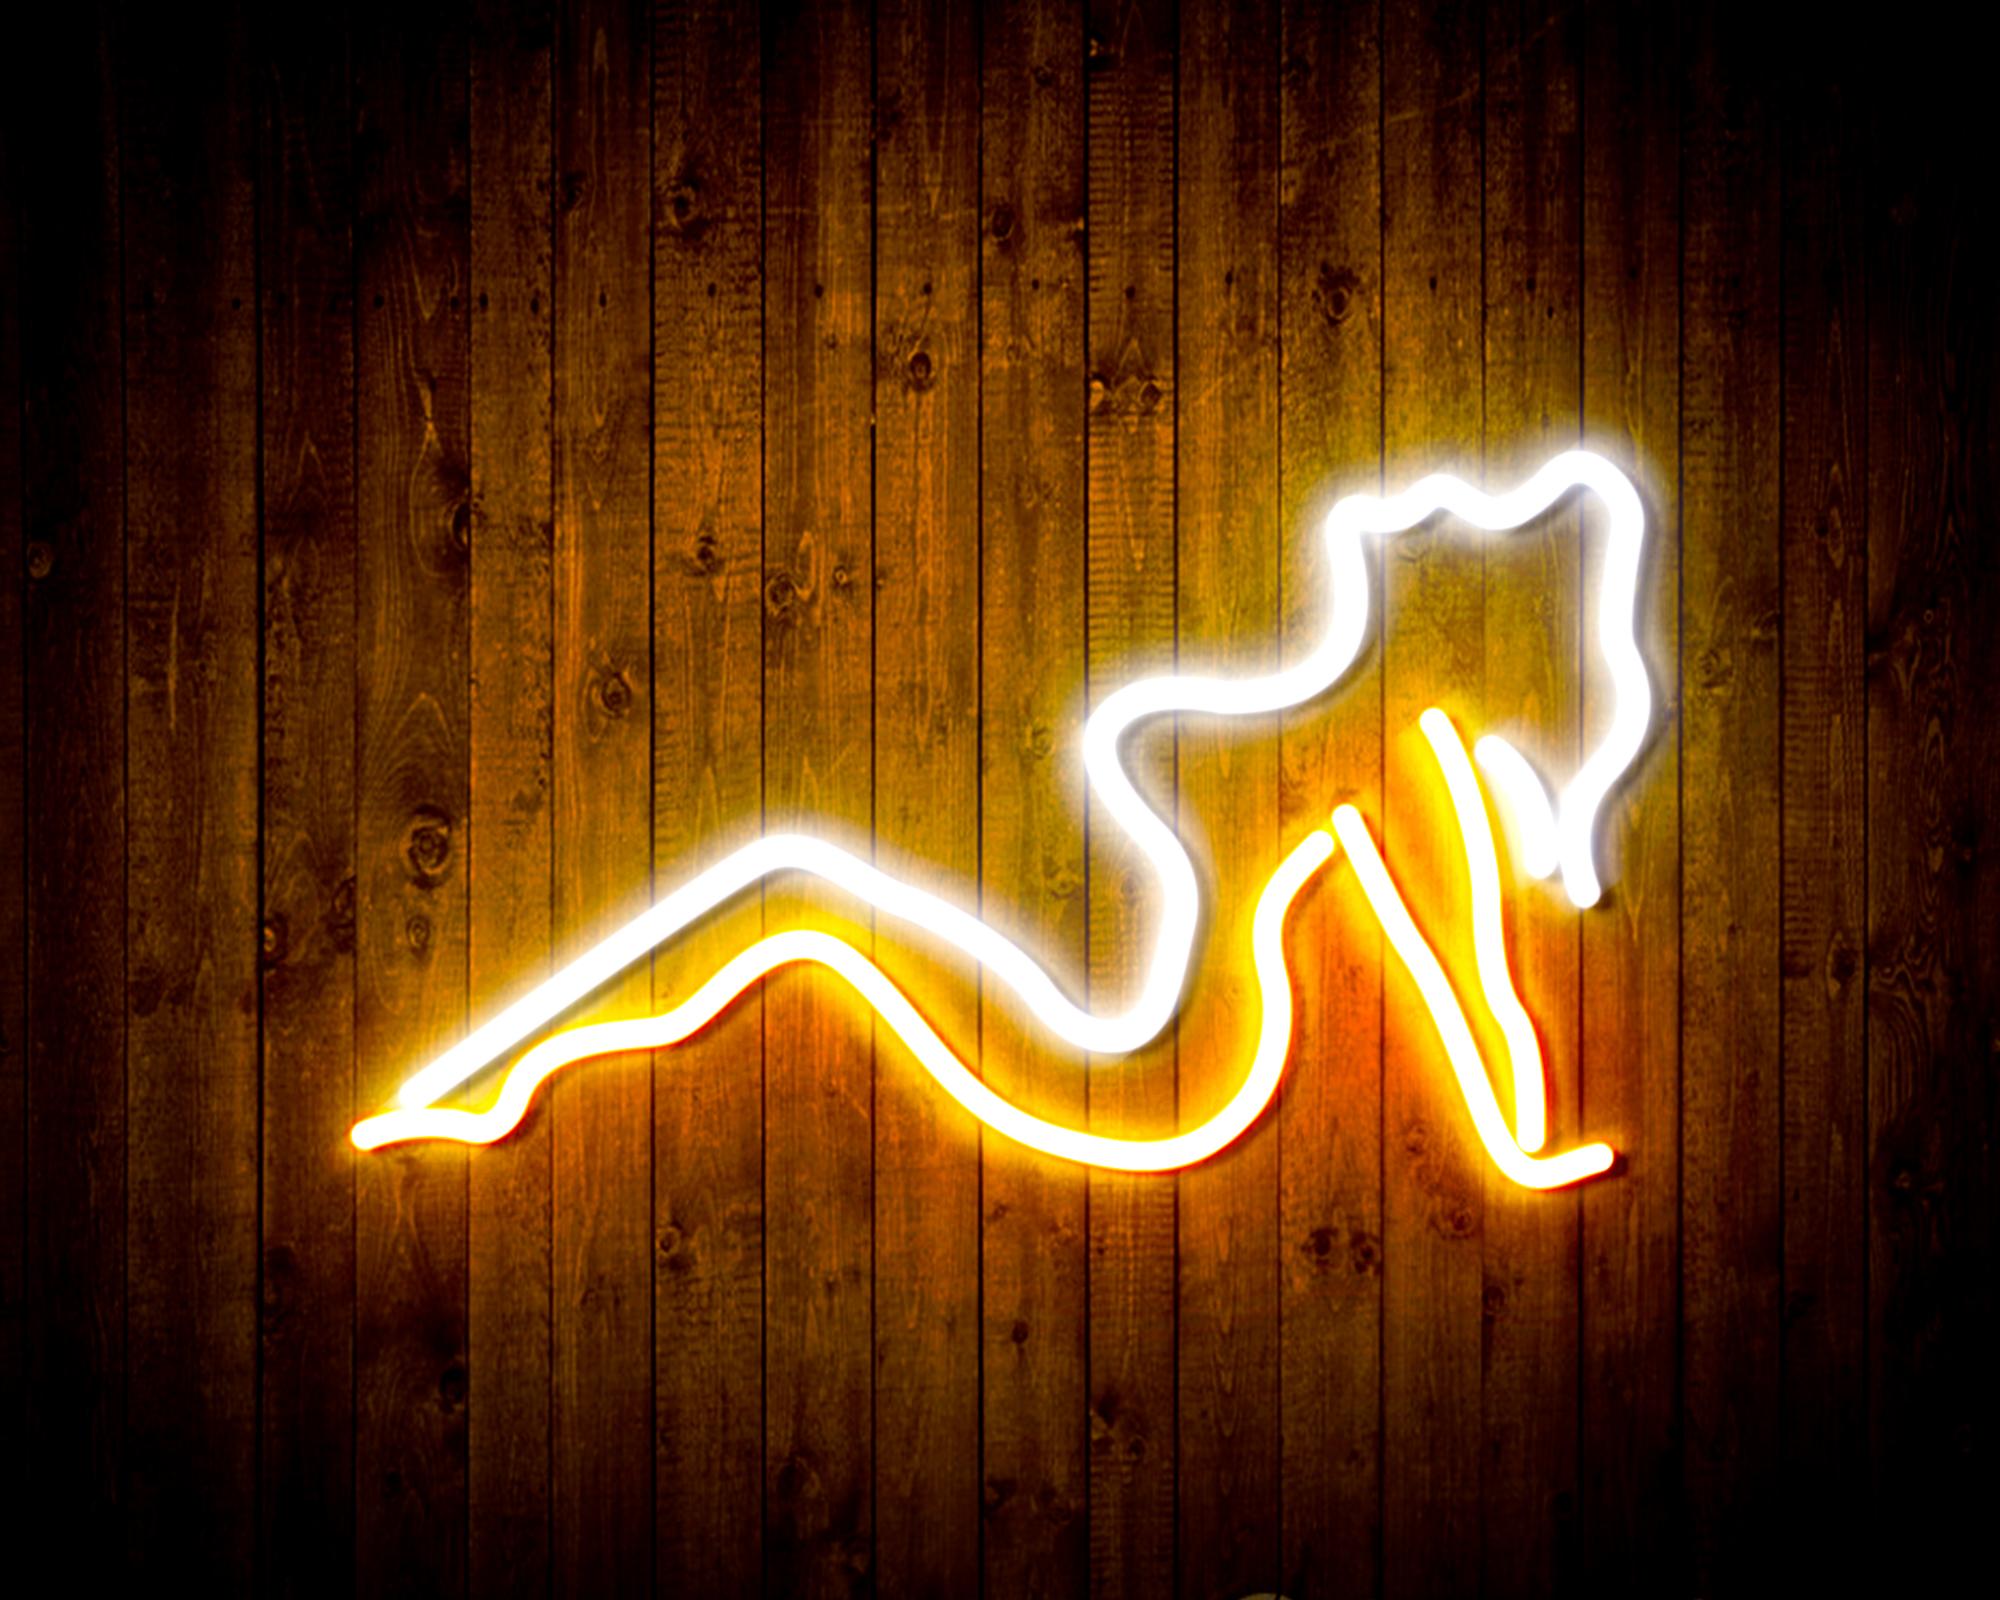 Sexy Lady LED Neon Sign Wall Light